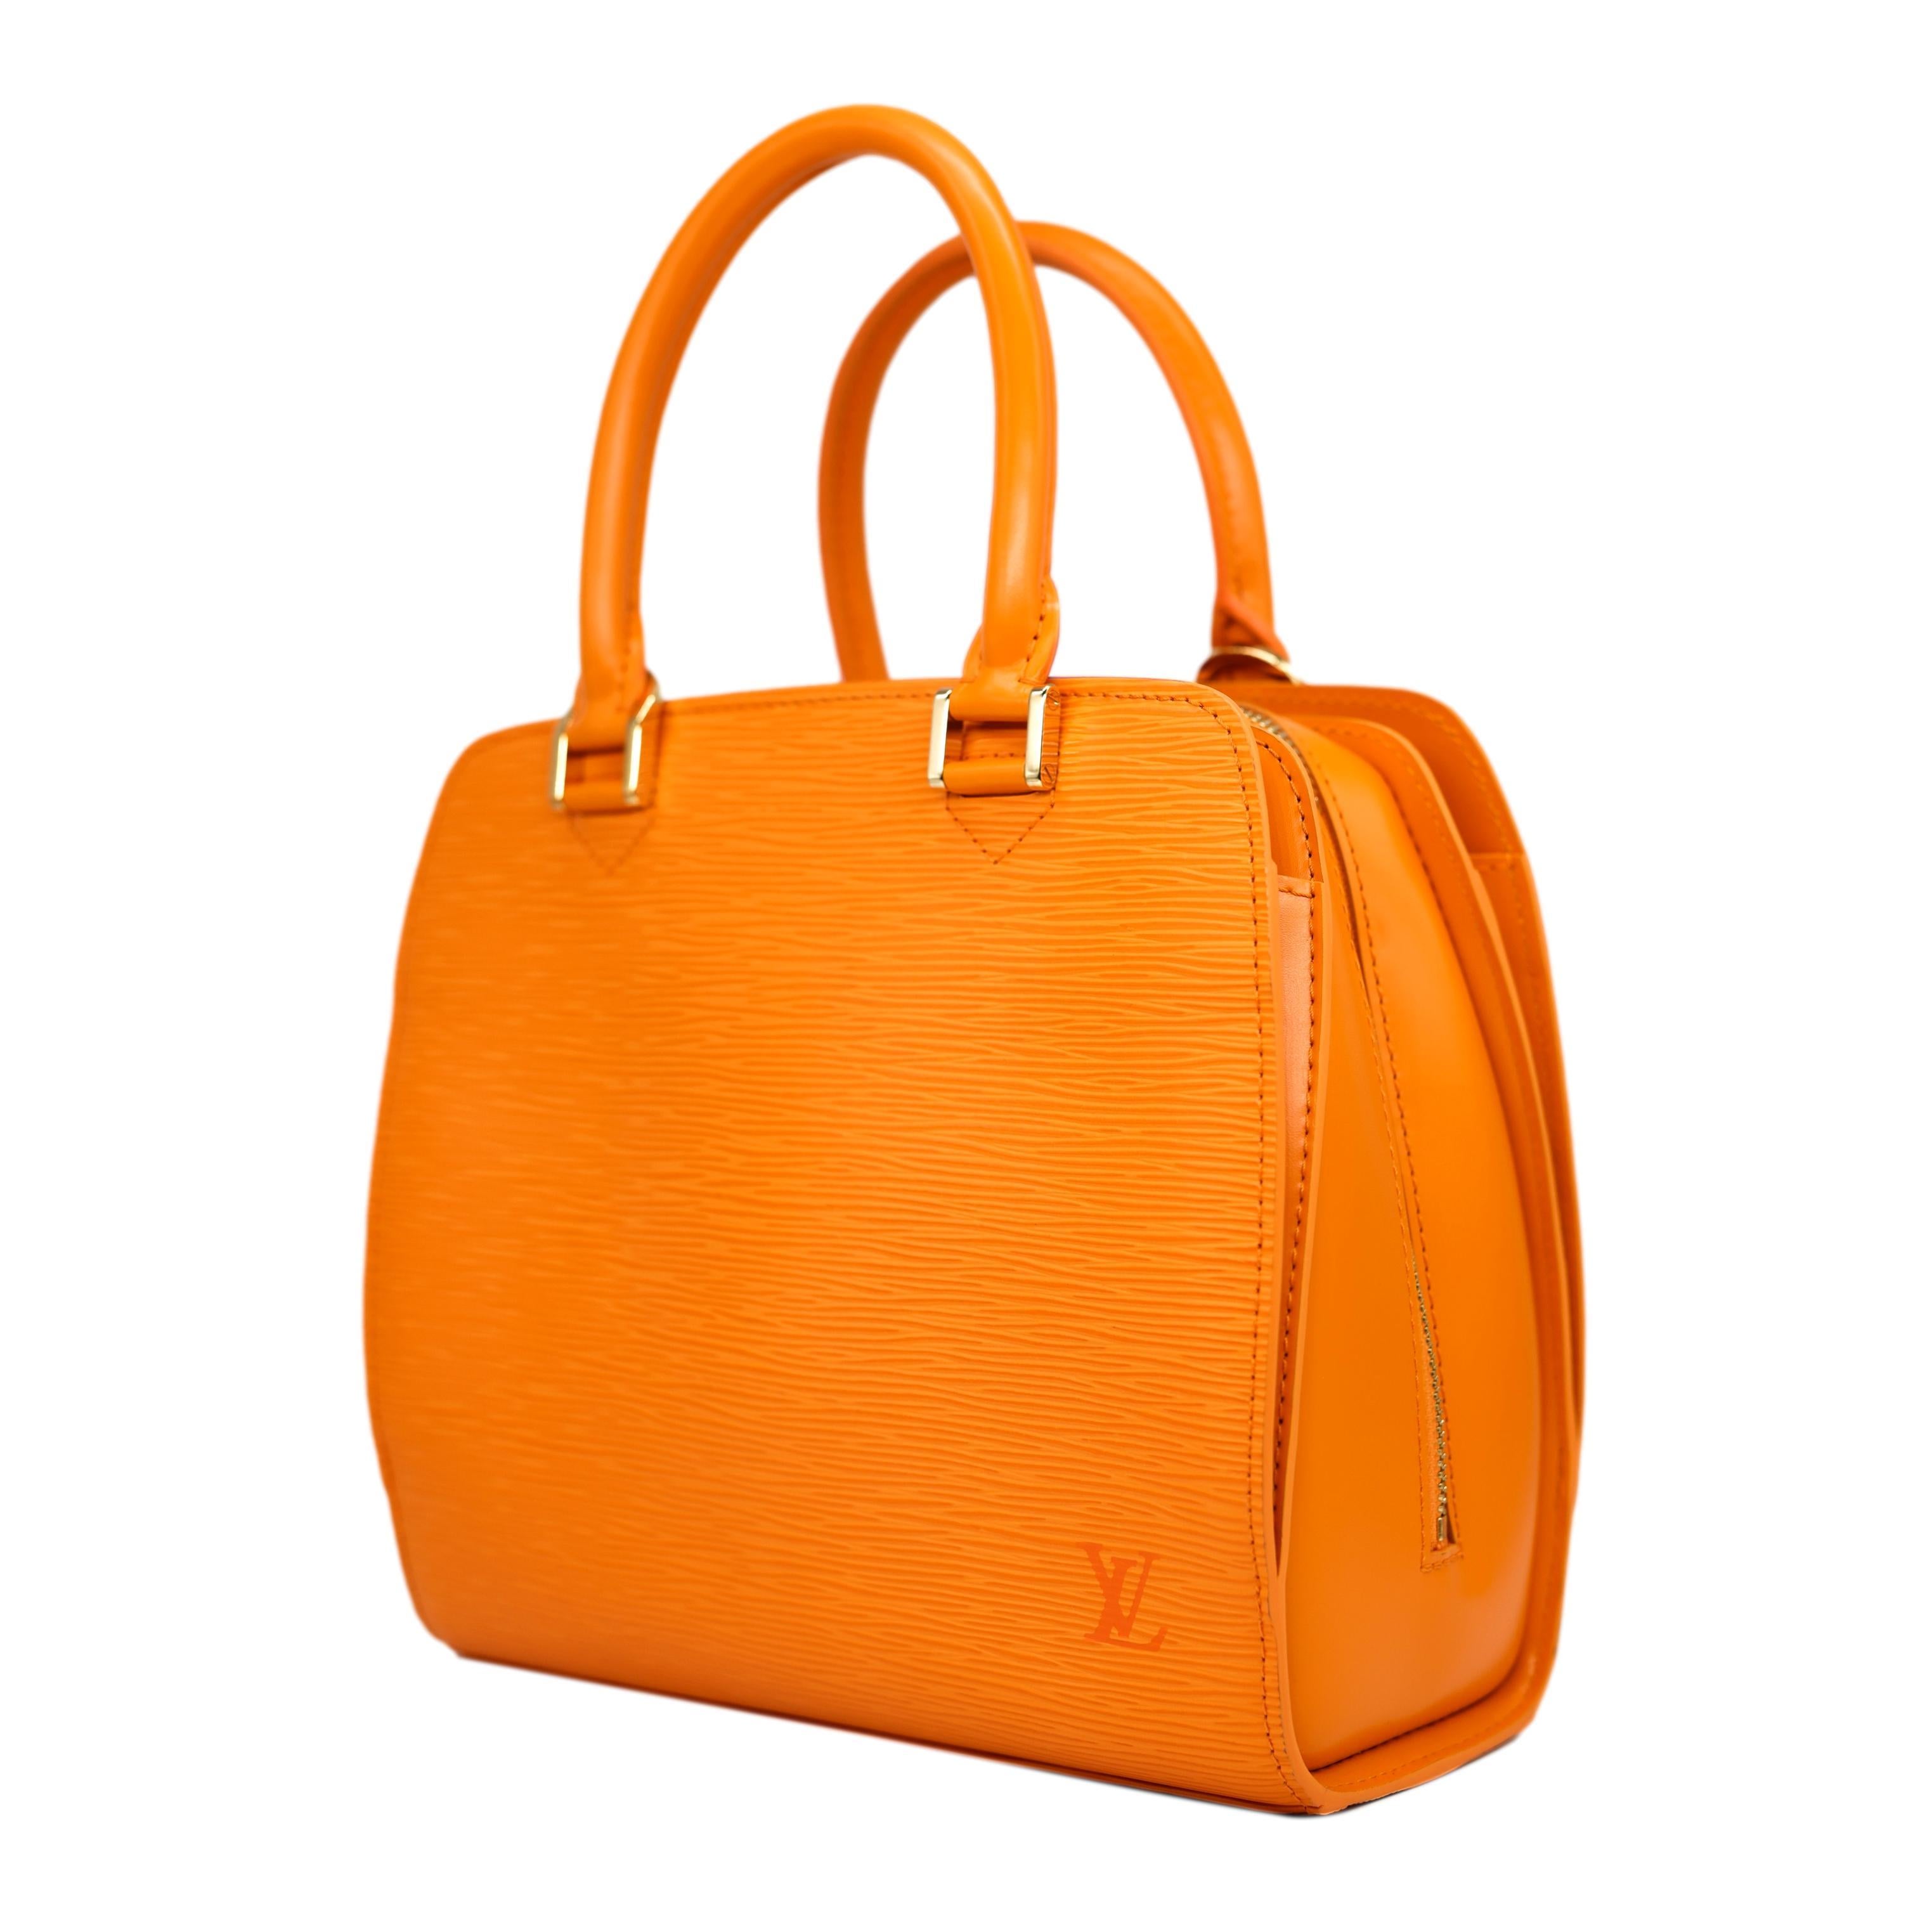 Louis Vuitton Mandarin EPI Orange Pont Neuf PM Top Handle Handbag, 2003. Made in France in November of 2003, the Pont Neuf was originally inspired by the oldest standing bridge in Paris in which Louis Vuitton designed a series of handbags inspired